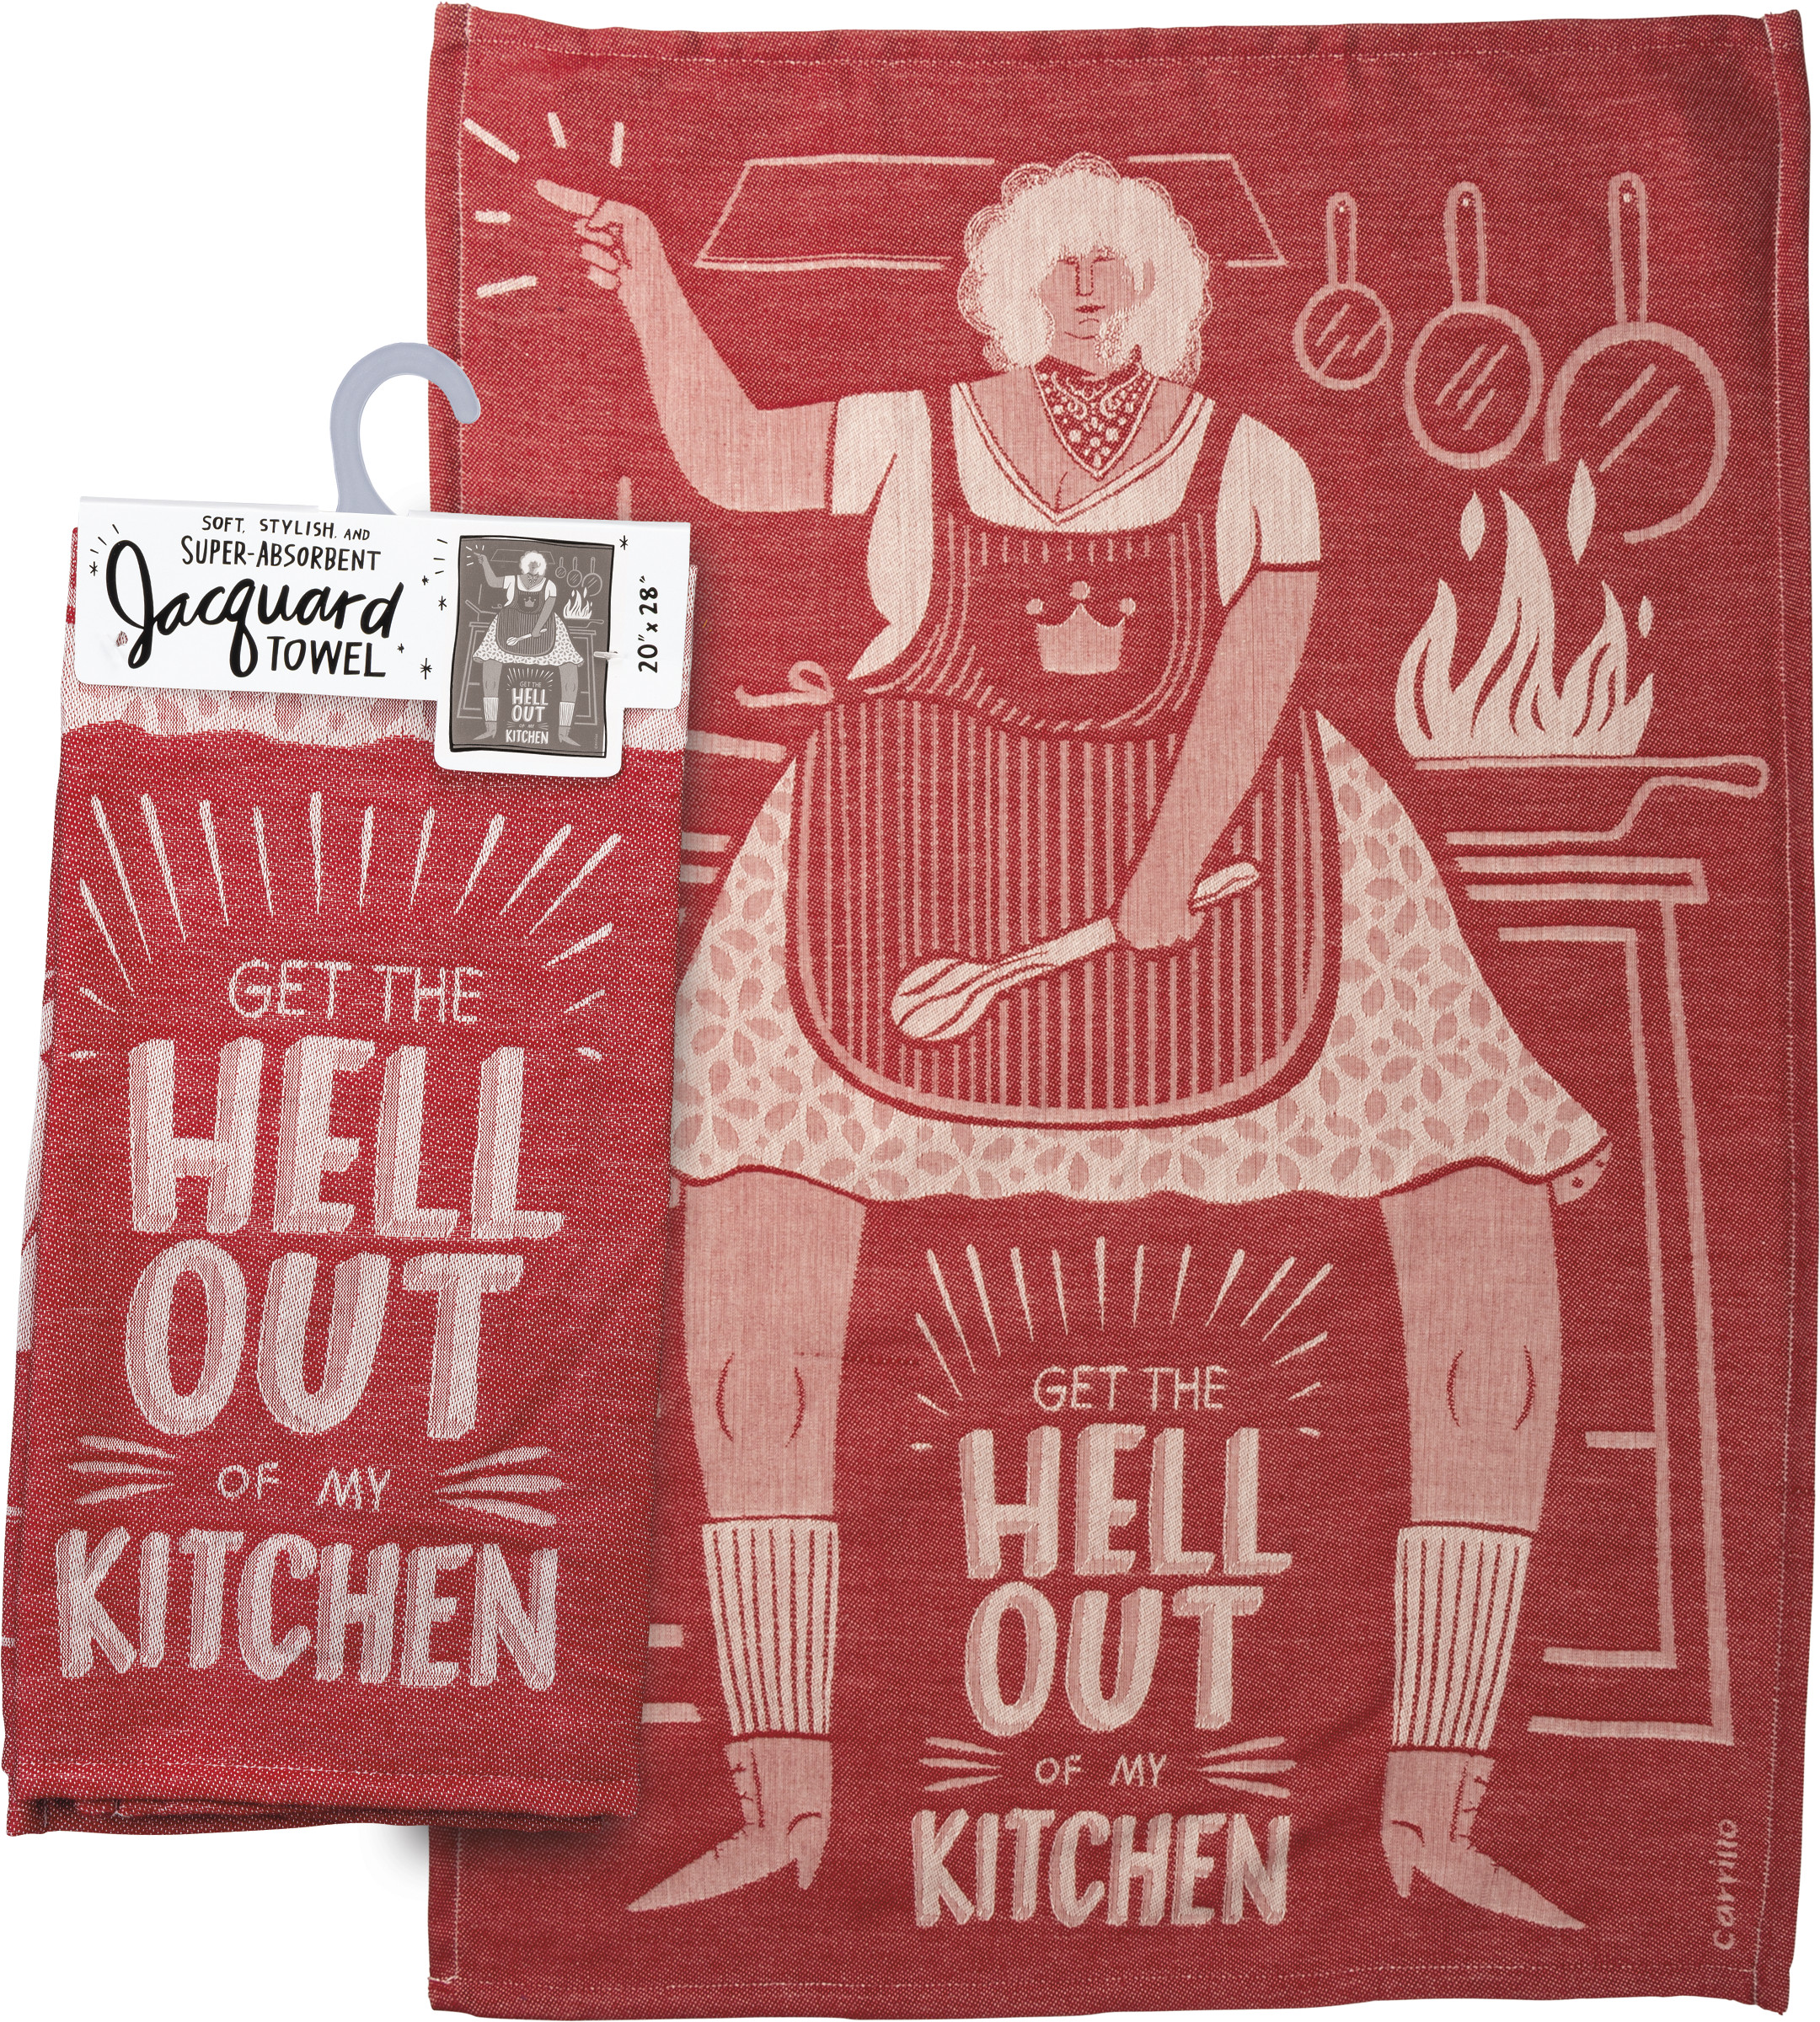 I COOK BEAR NAKED KITCHEN TOWEL - Schoolhouse Earth